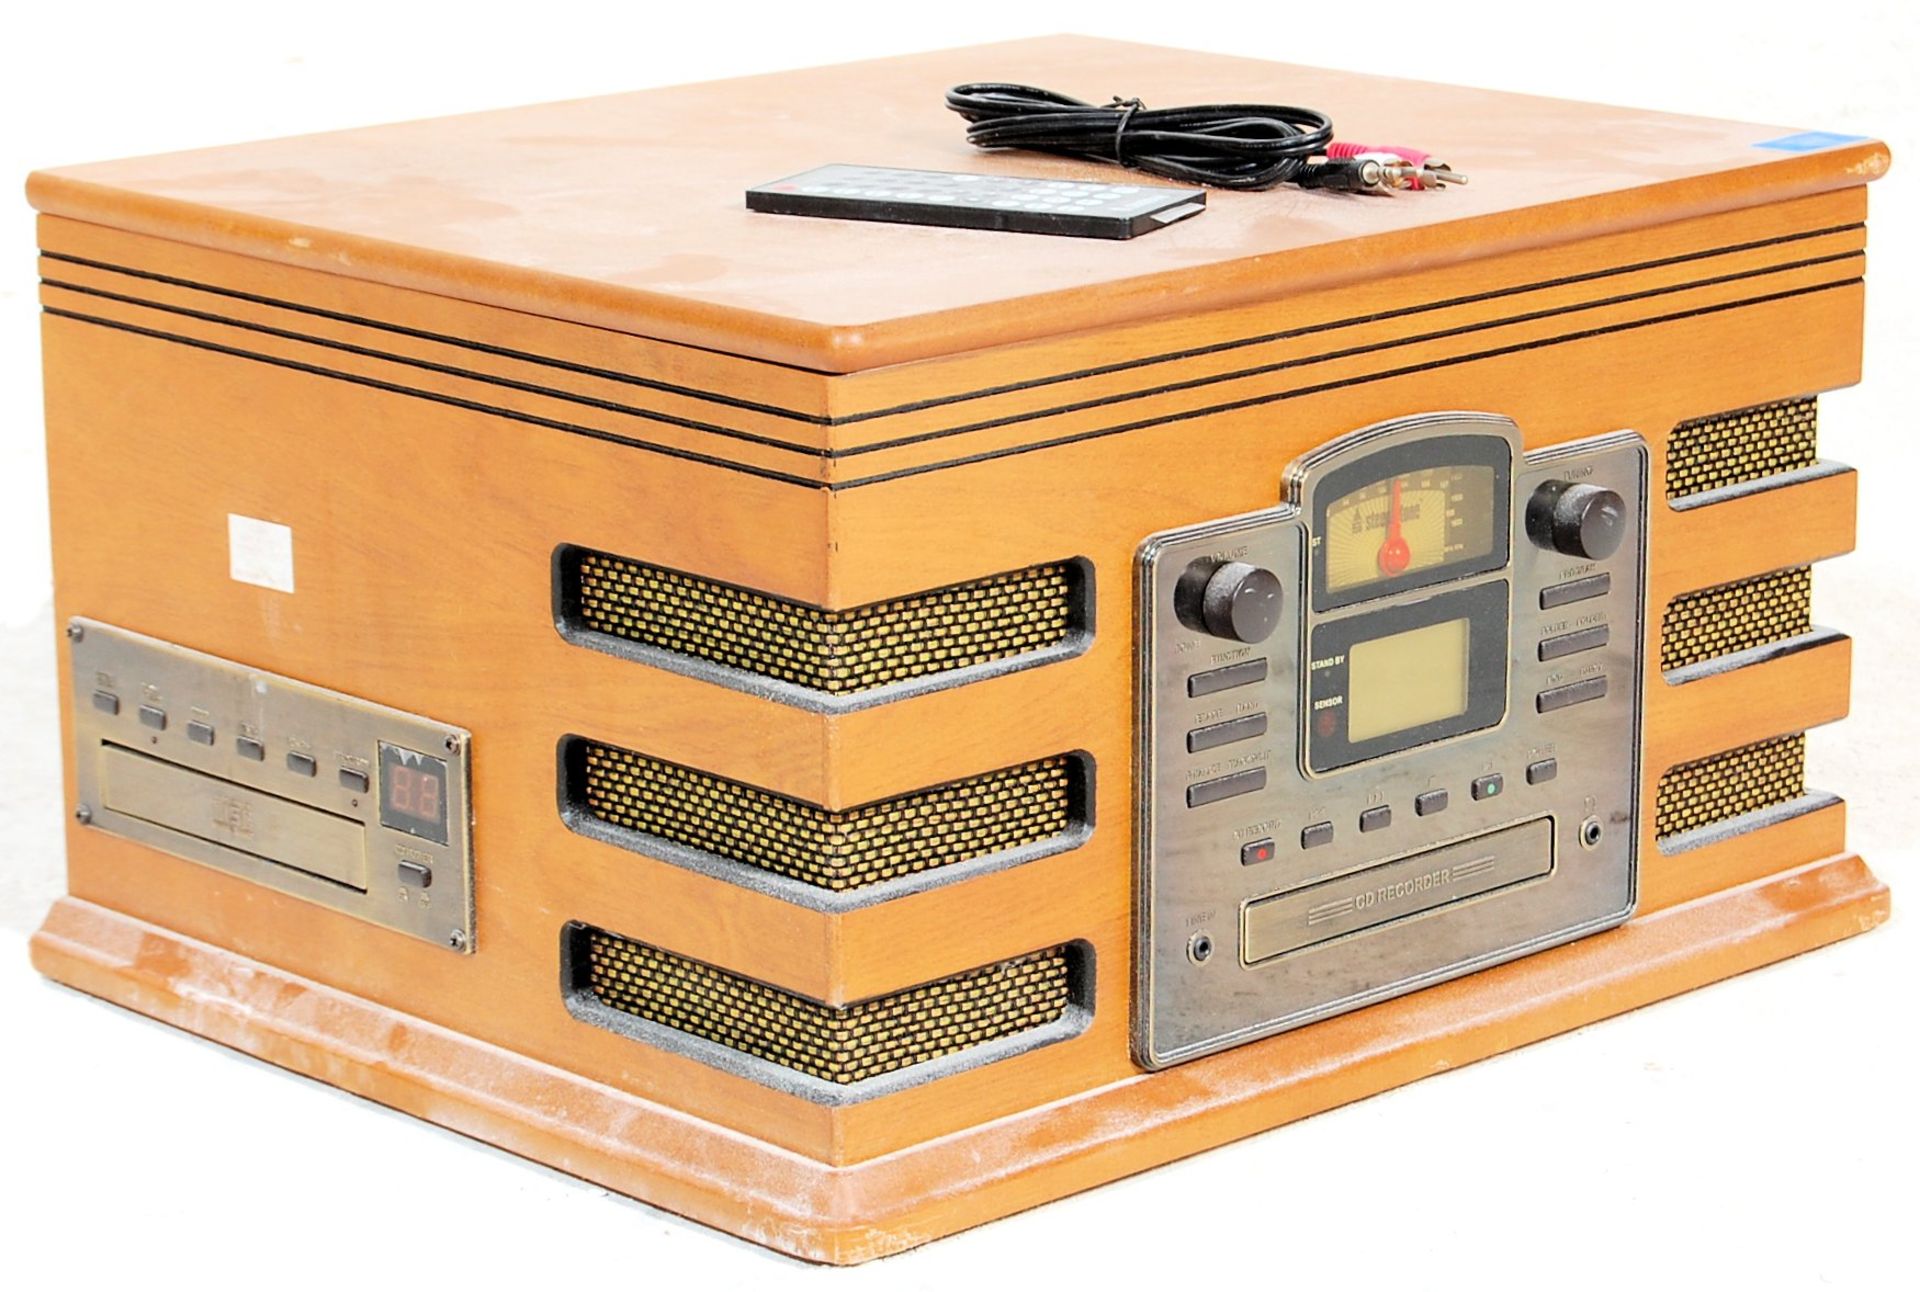 A vintage retro wooden effect Hi Fi stereo system by Steepletone with a black grill and facia.